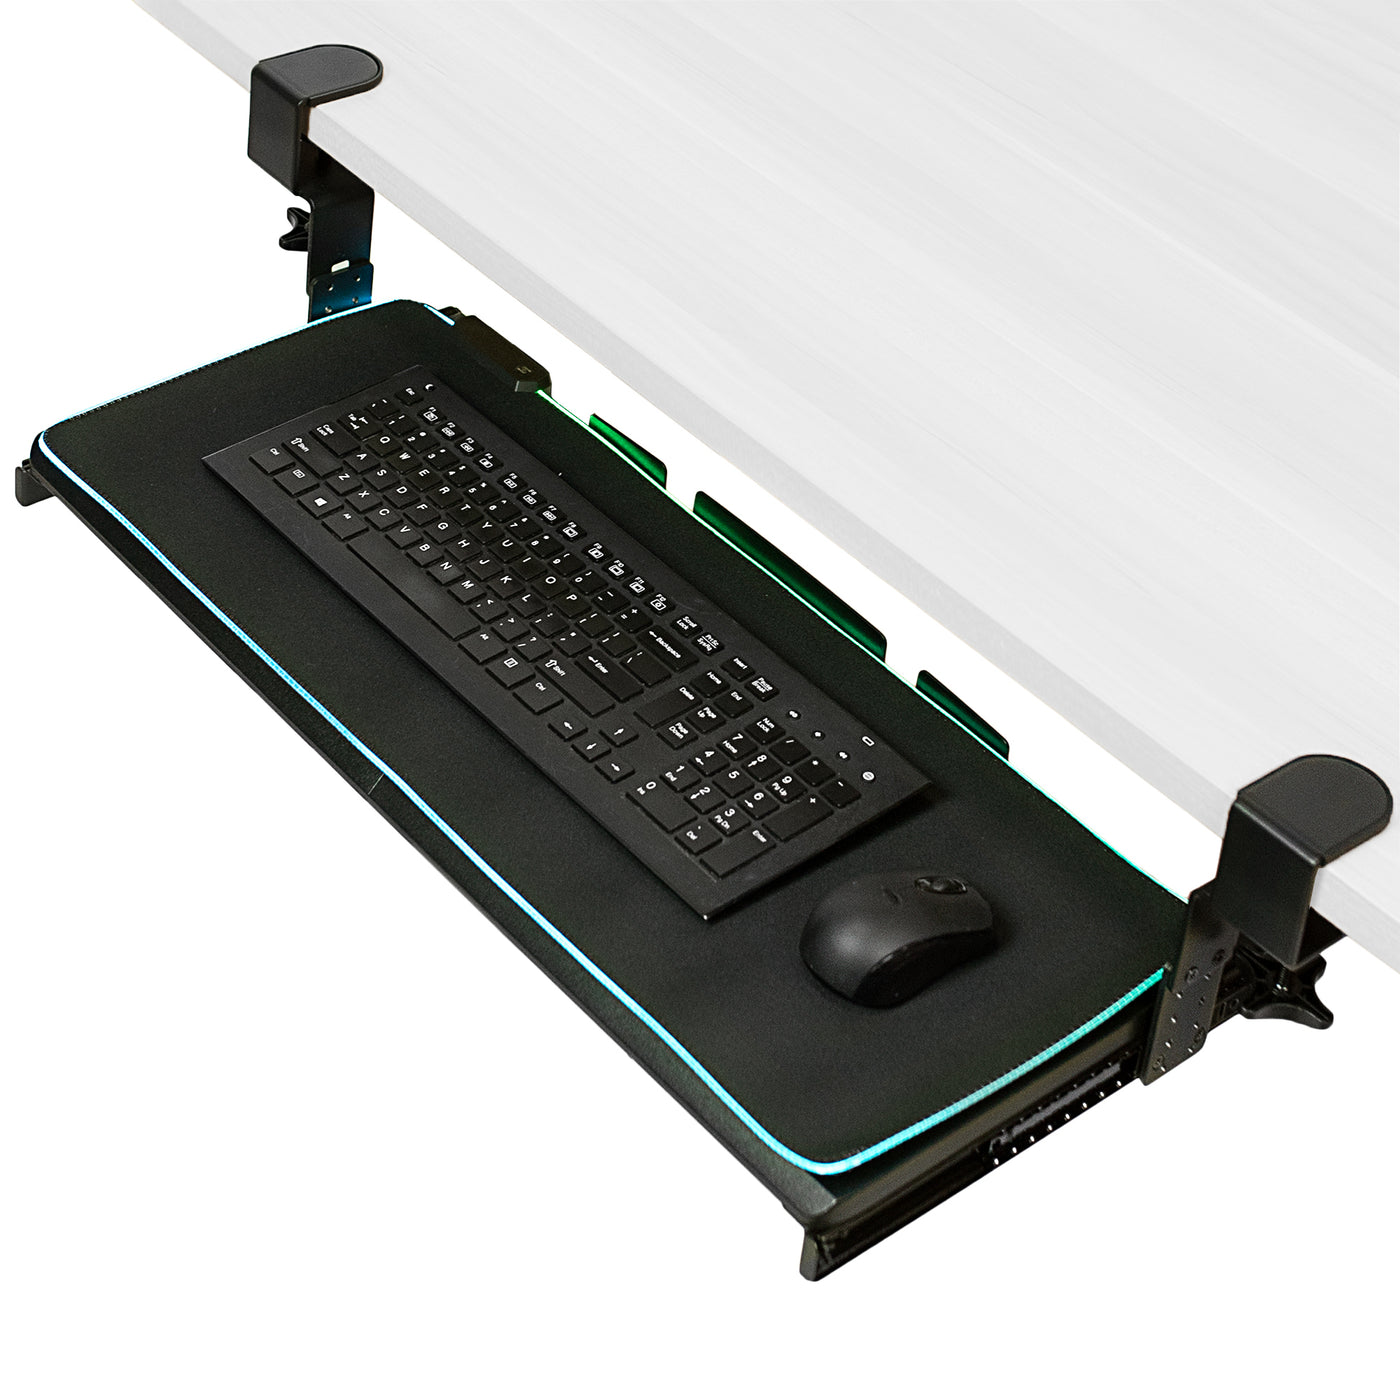 Clamp-on height adjustable pullout keyboard tray attachment with RGB mouse pad.